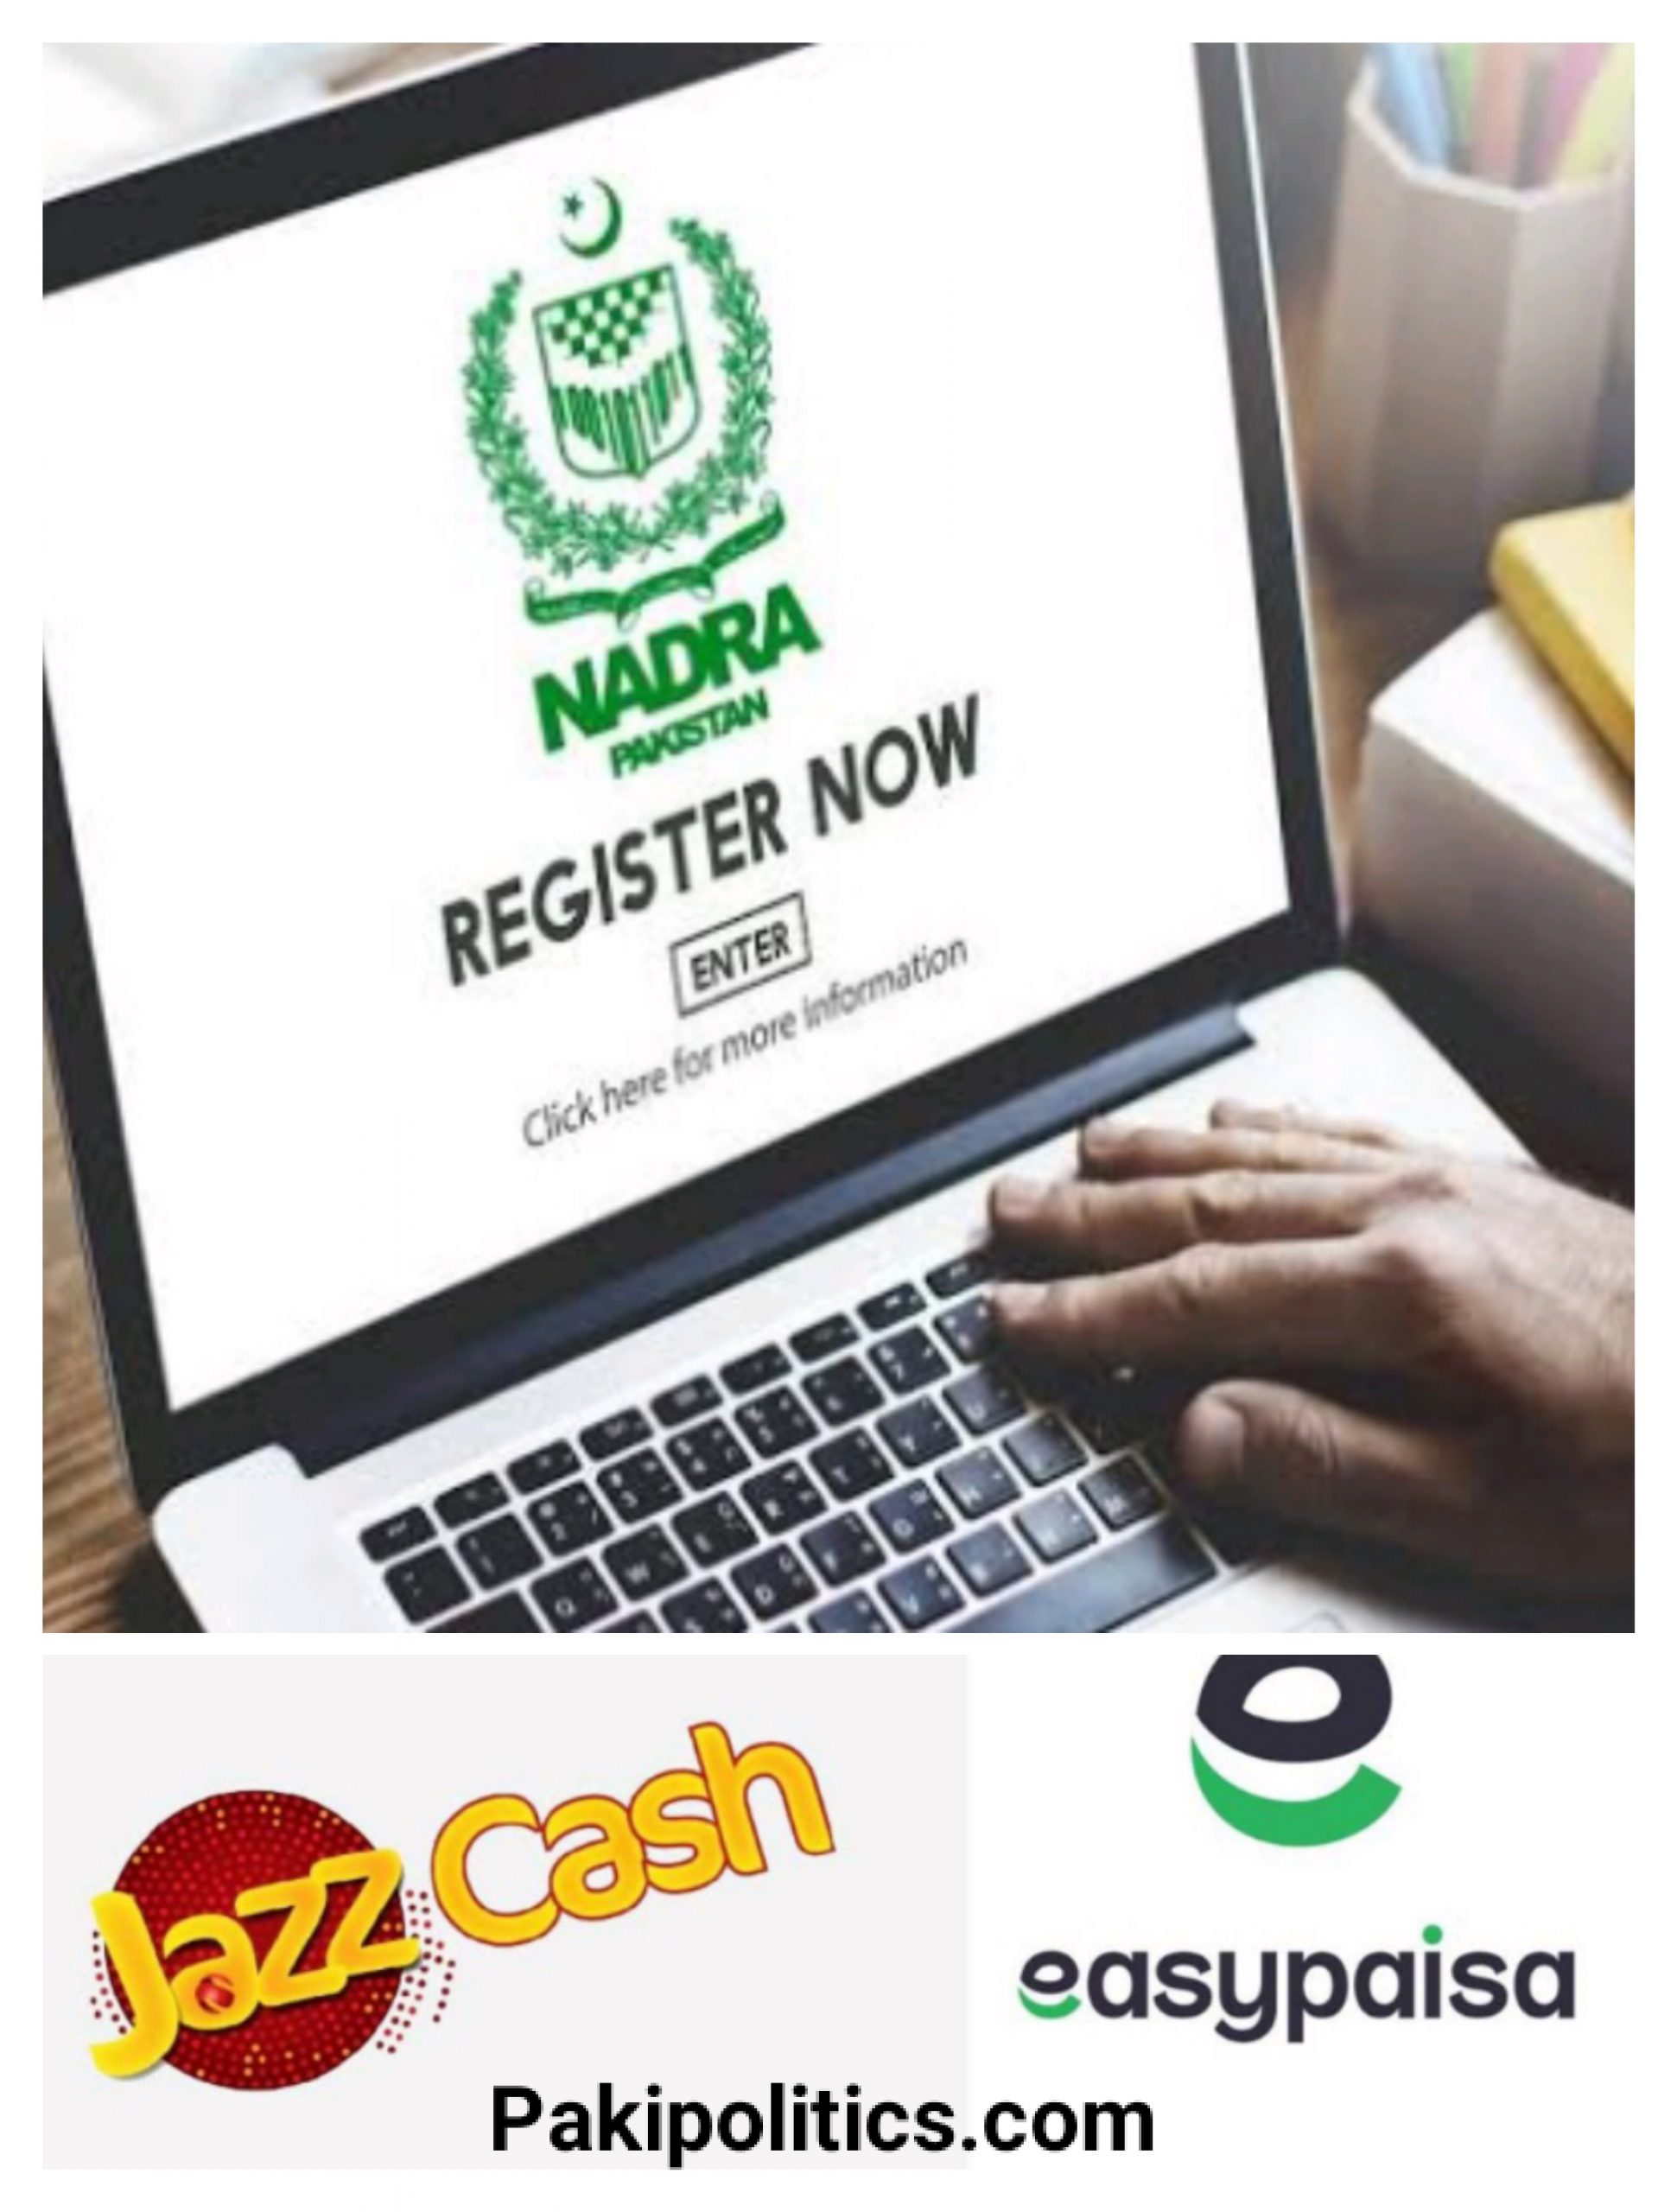 NADRA has introduced the facility of accepting digital payments along with Jazz Cash and EasyPay.